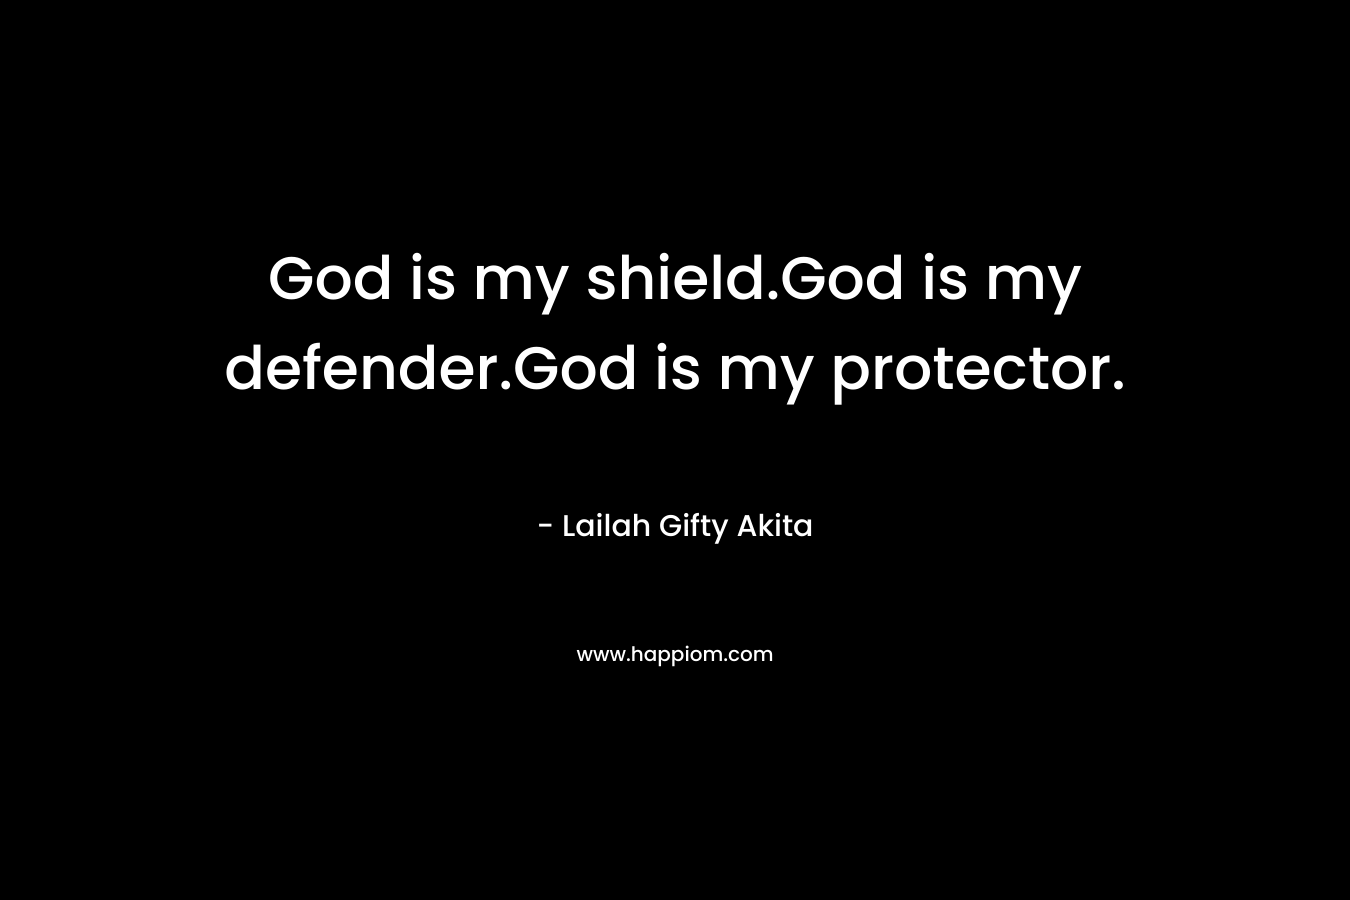 God is my shield.God is my defender.God is my protector.